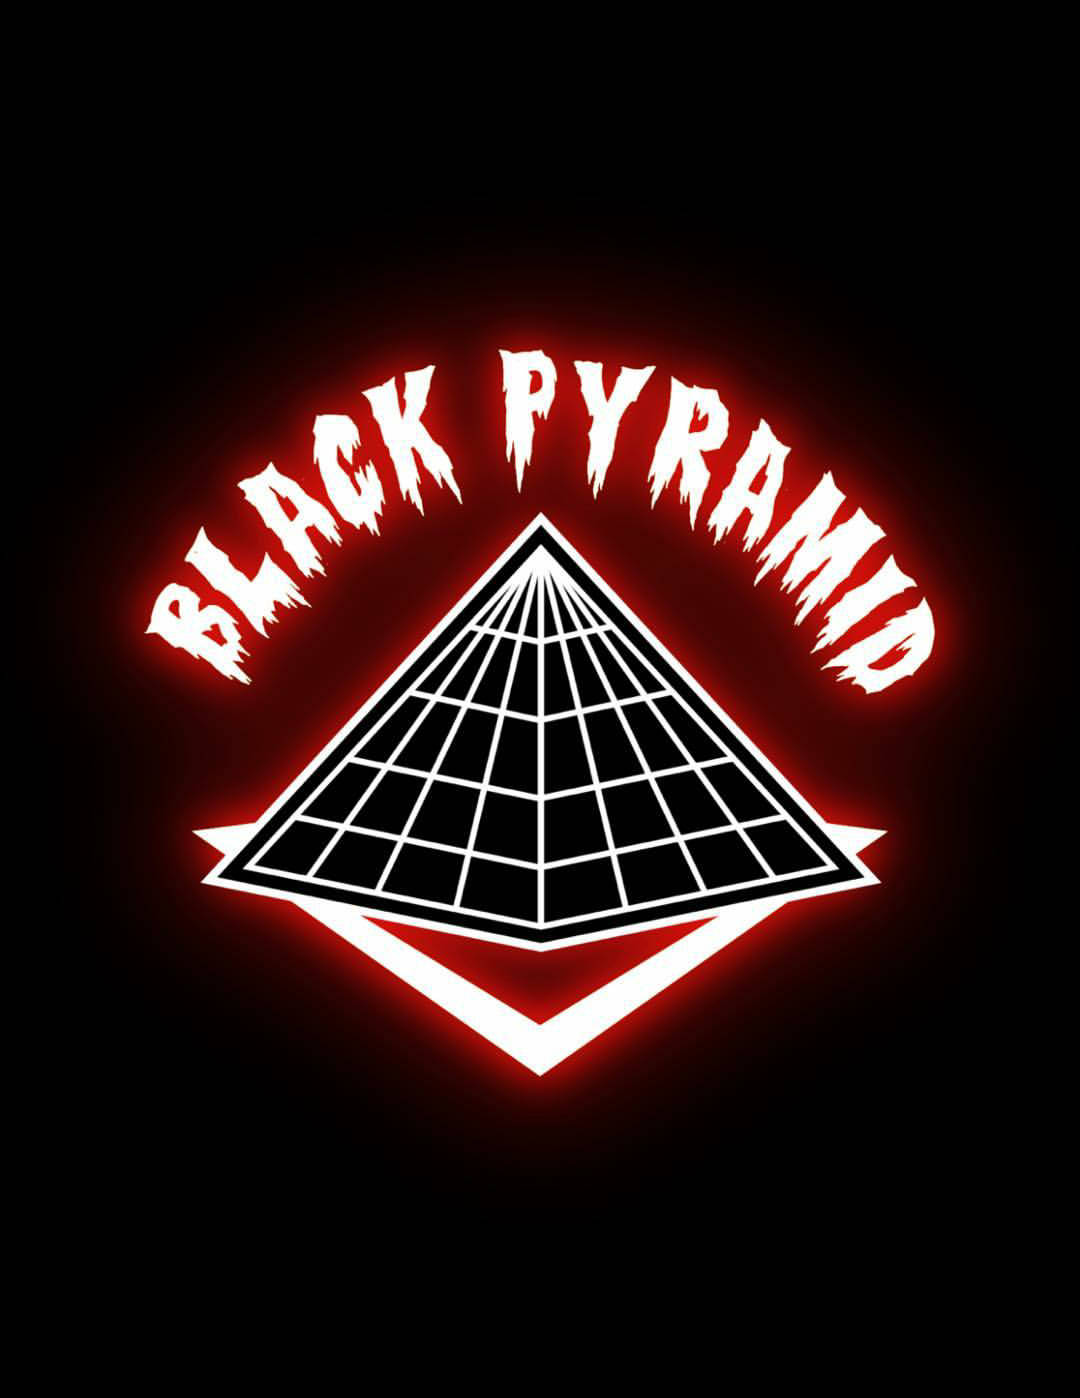 Black Pyramid With Neon Red Text Wallpaper